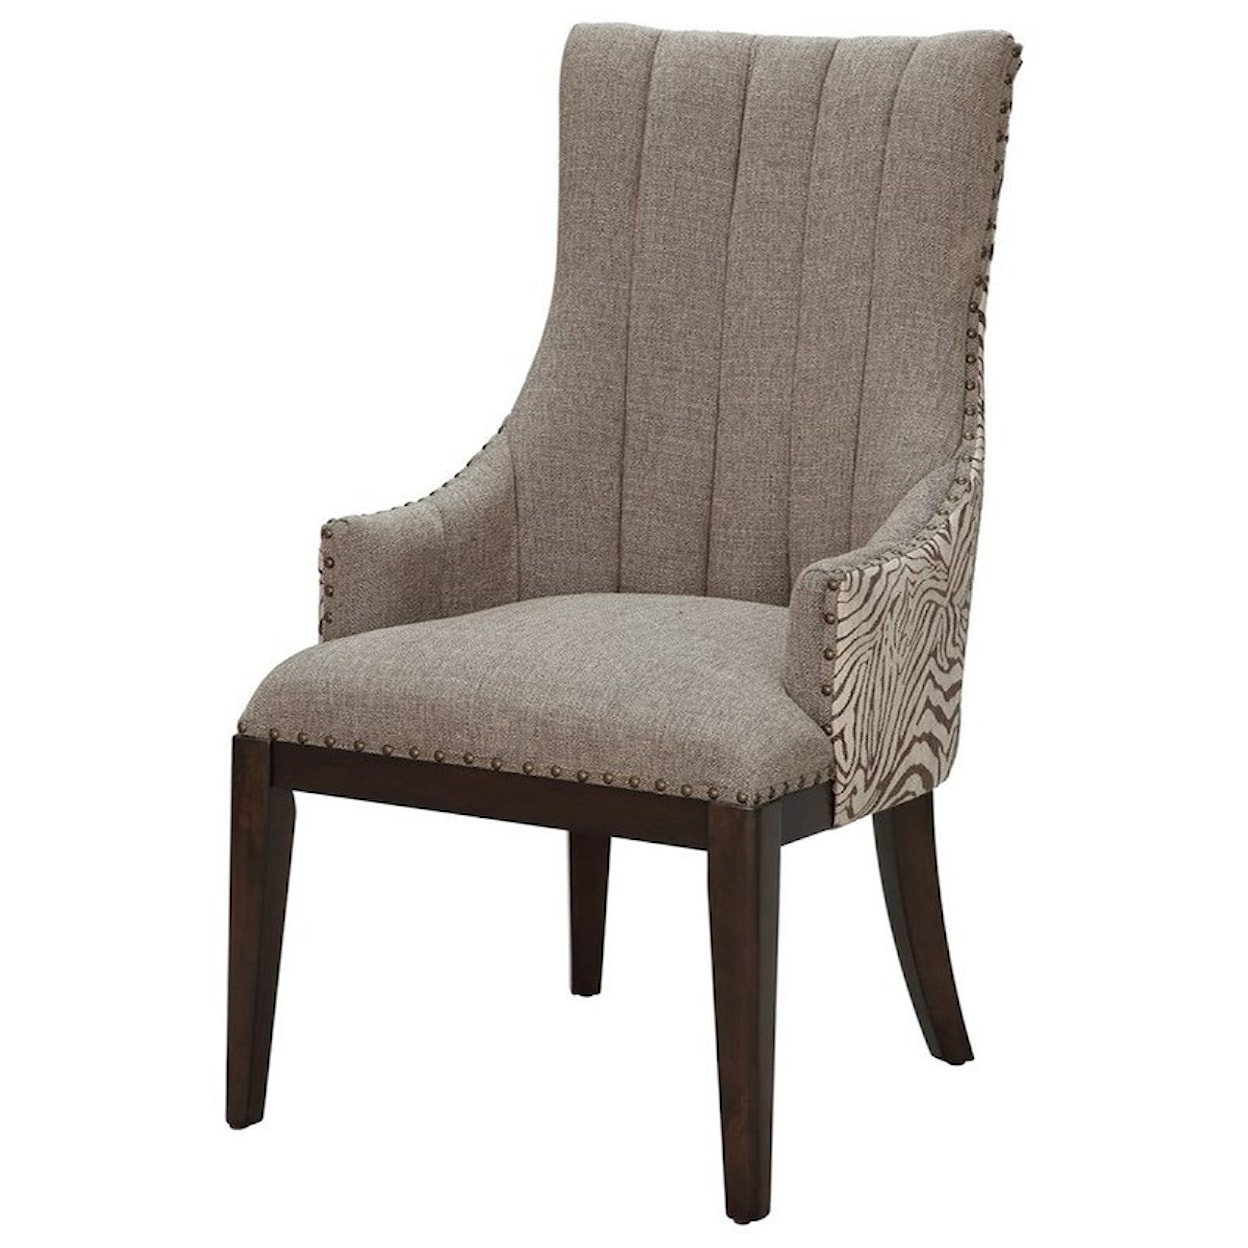 Crestview Collection Accent Furniture Safari Two Toned Channel Back Chair